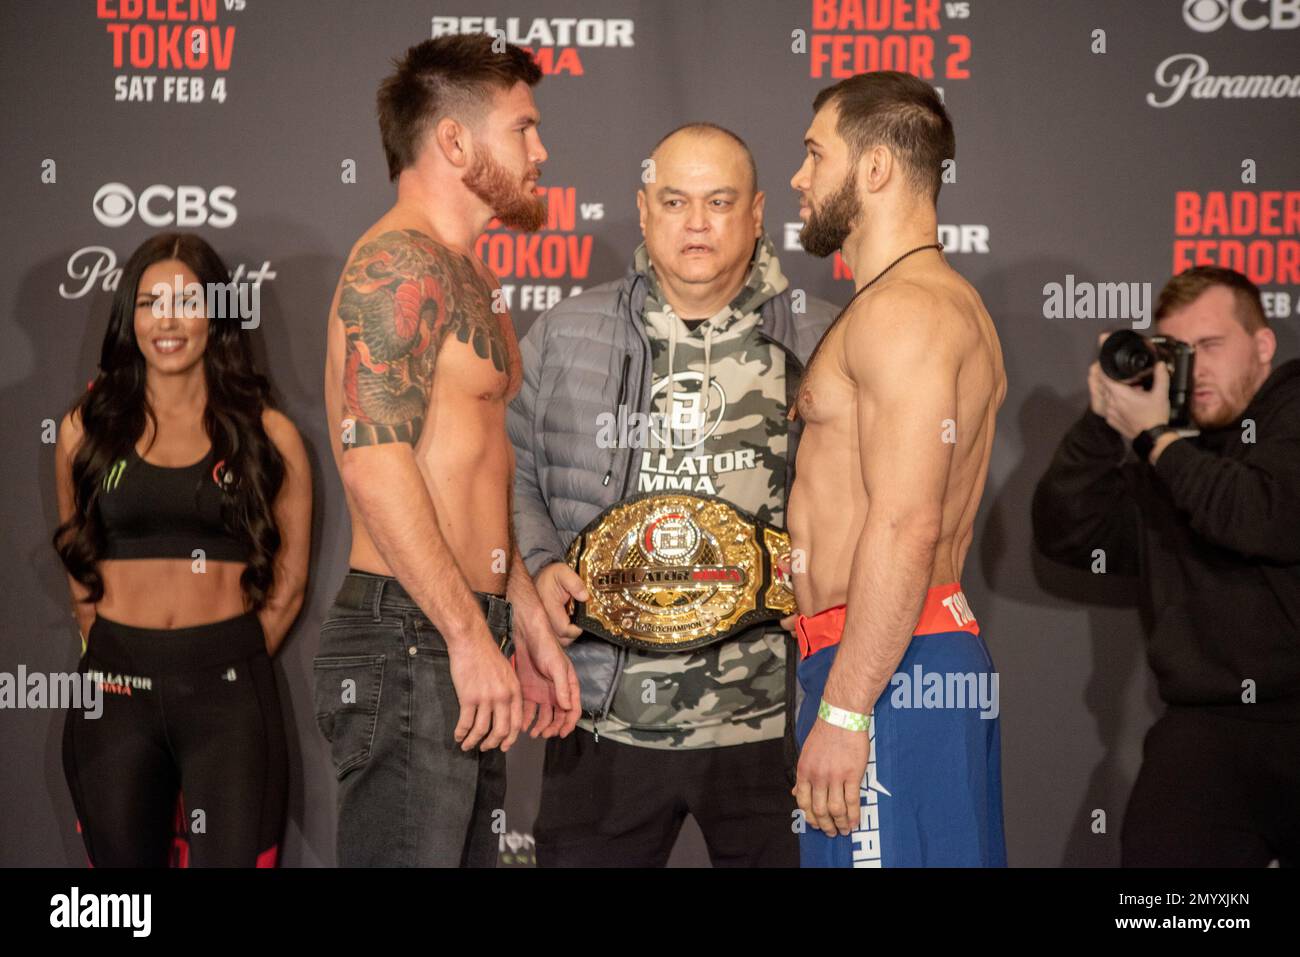 anatoly-tokov-bellator-172-official-weigh-ins